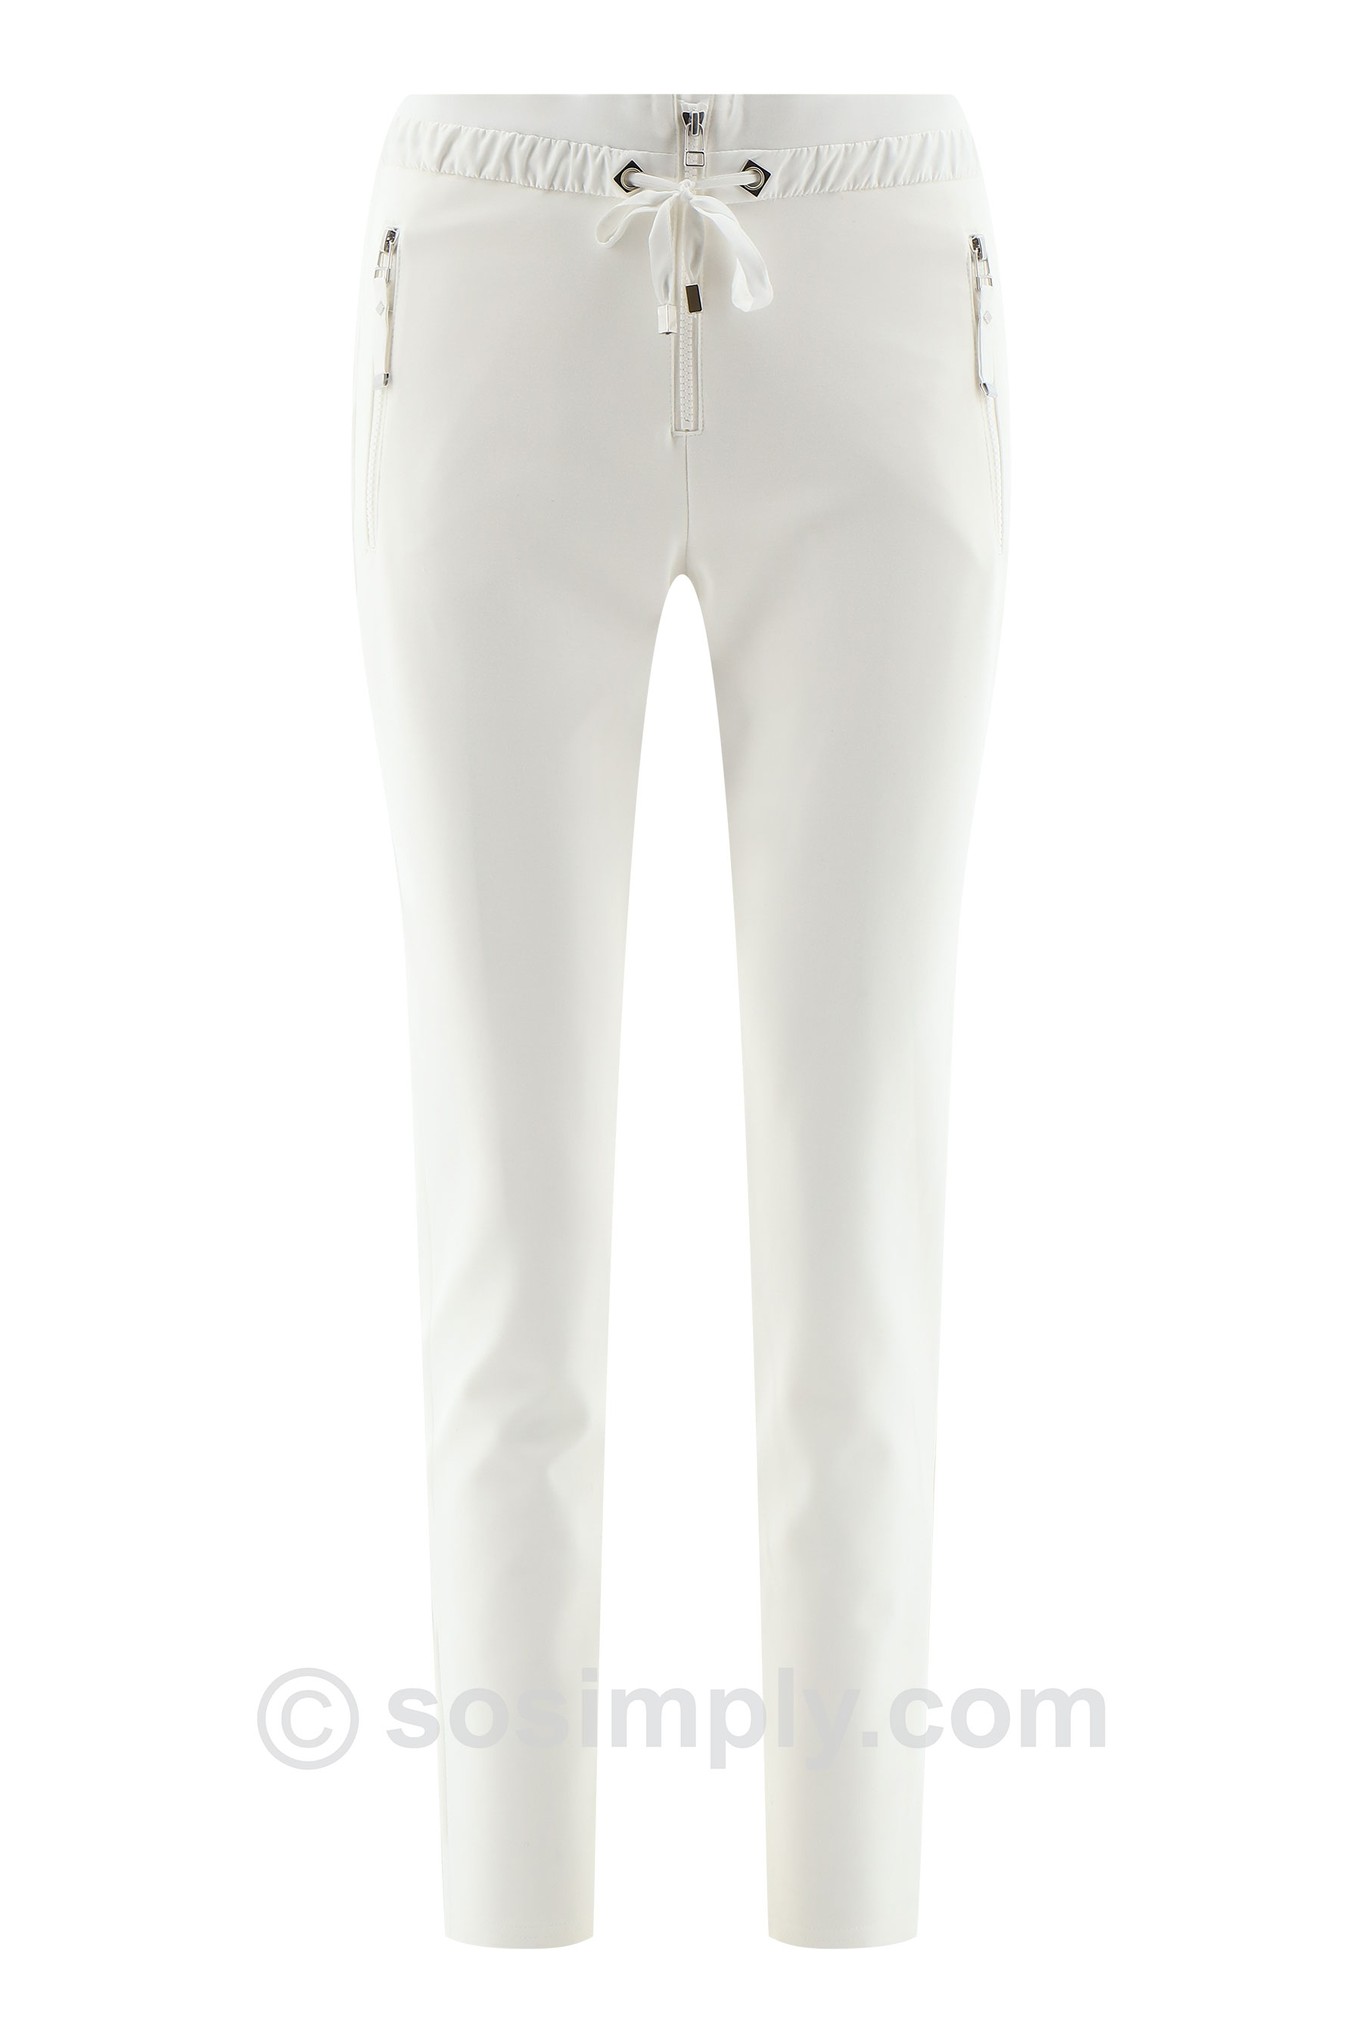 I'cona Luxe Sports Pants 